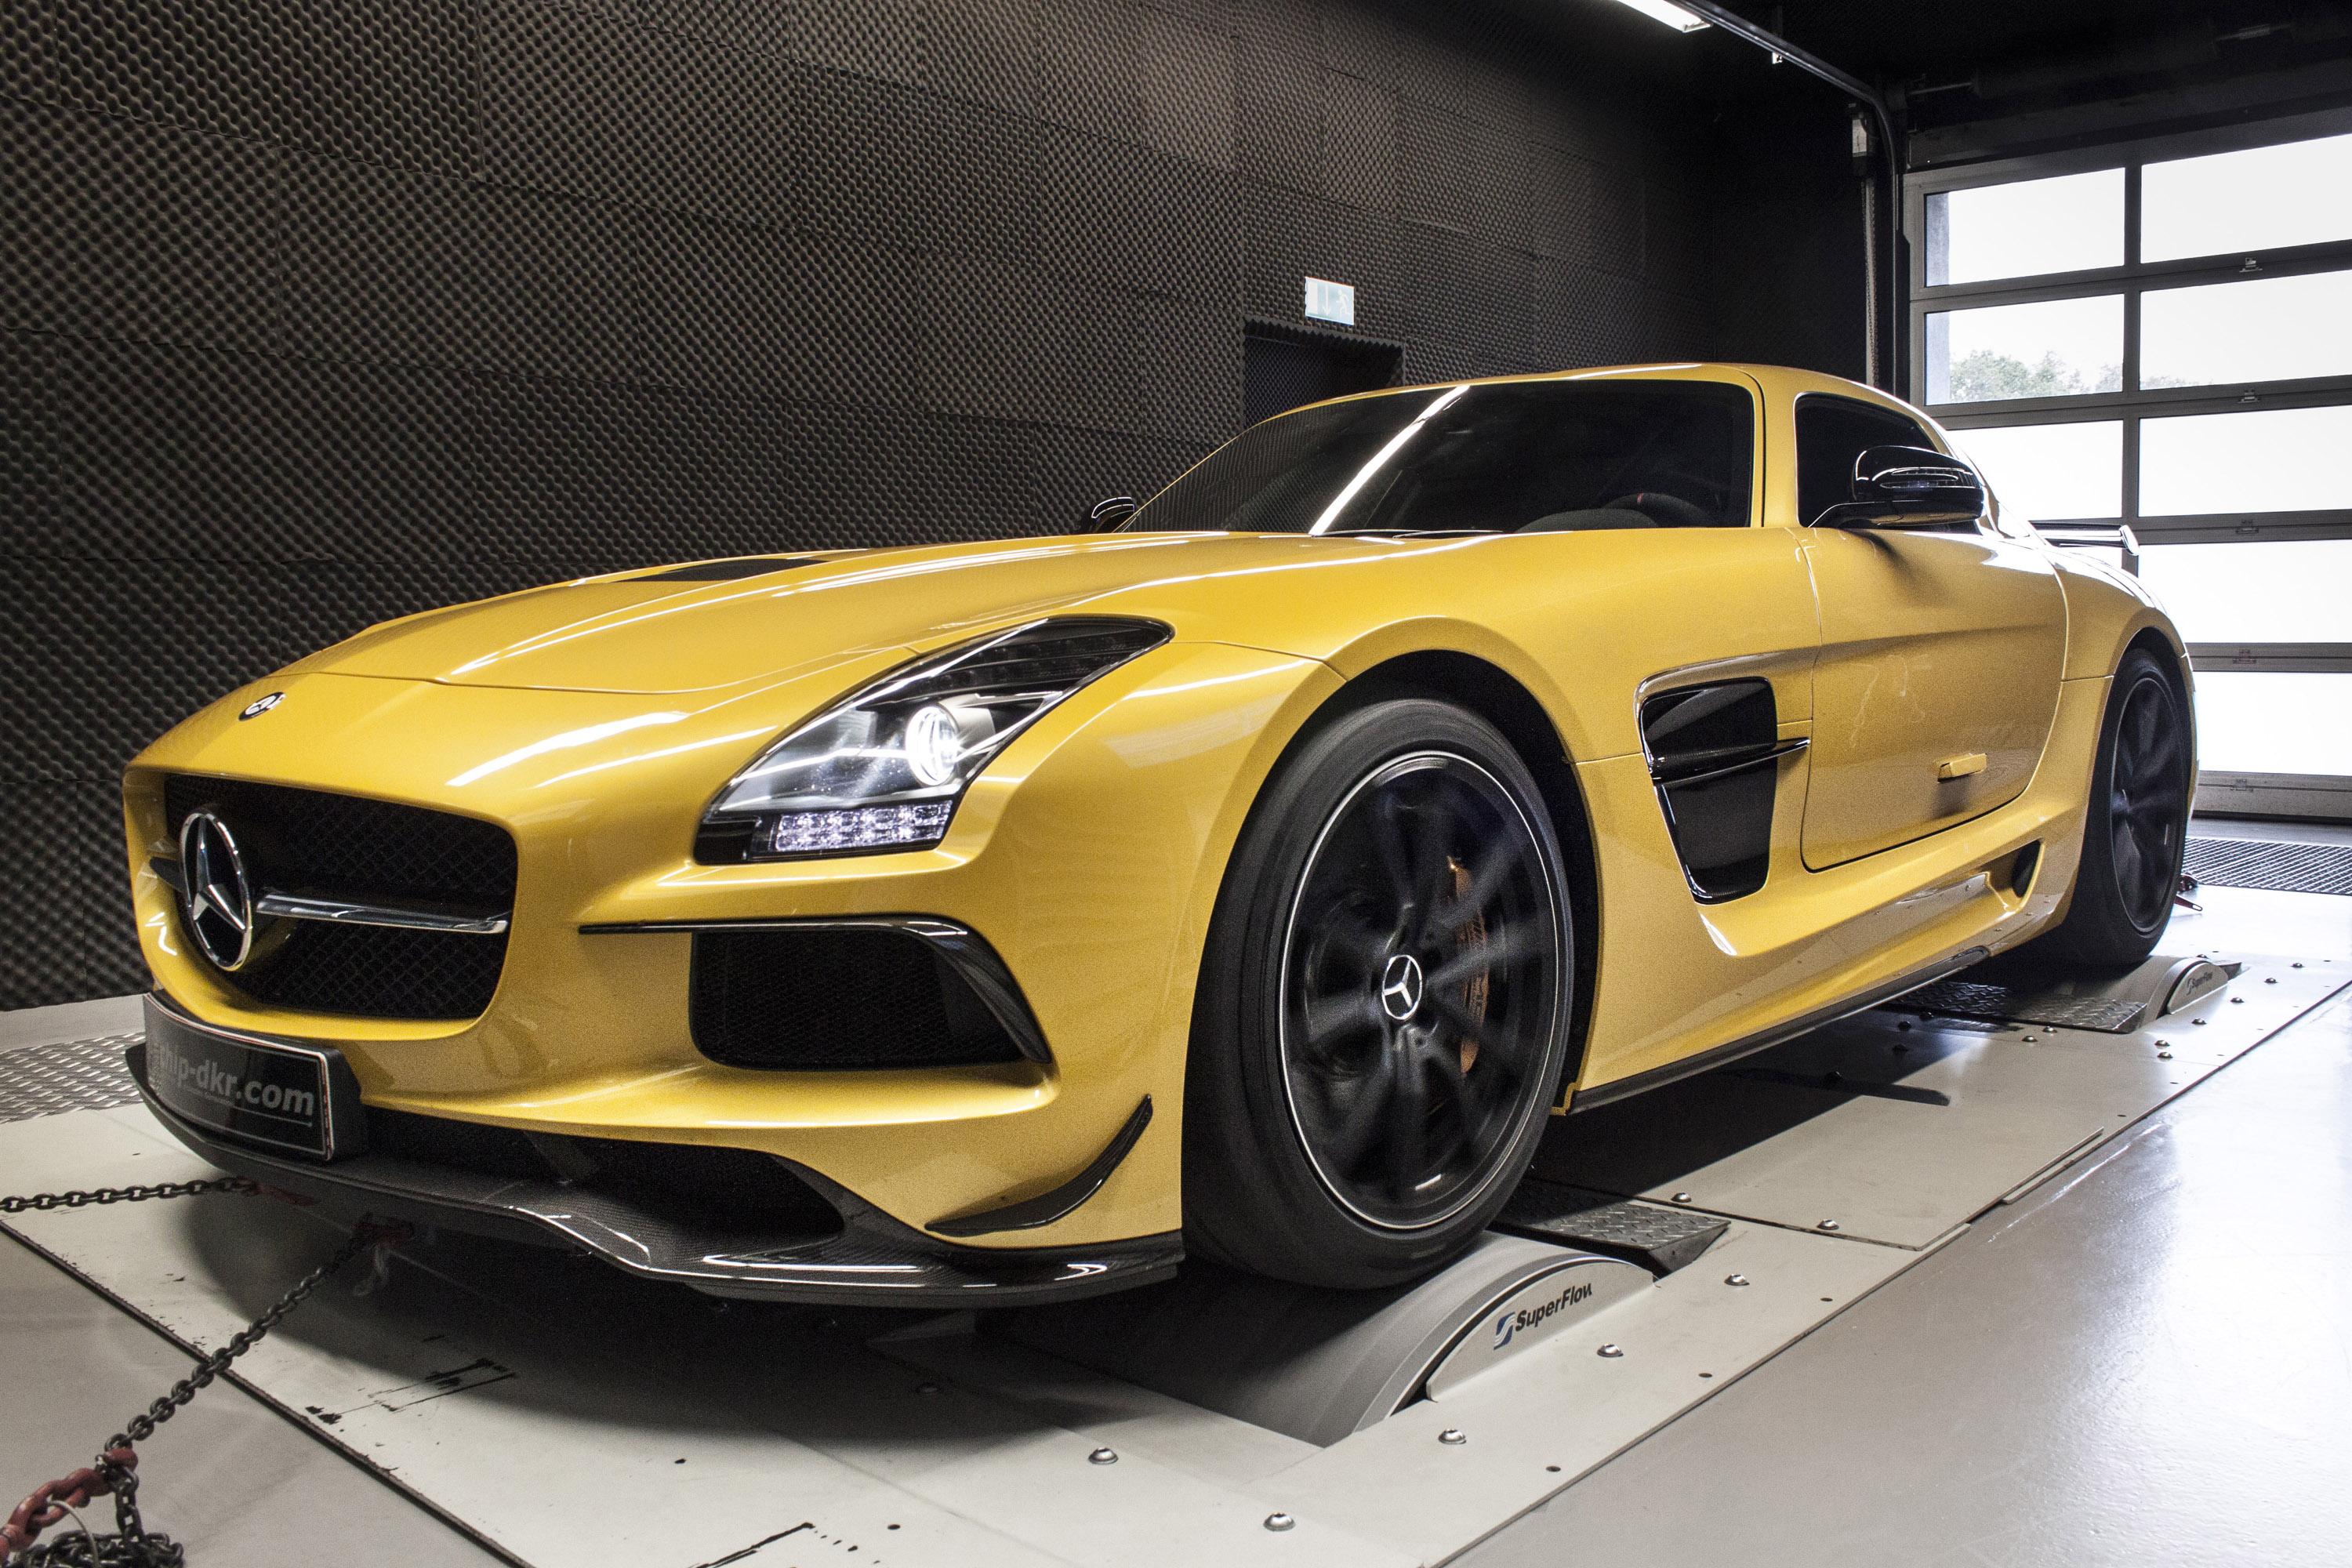 Mercedes-Benz SLS 6.3 AMG Black Series Powered-Up By Mcchip- pic